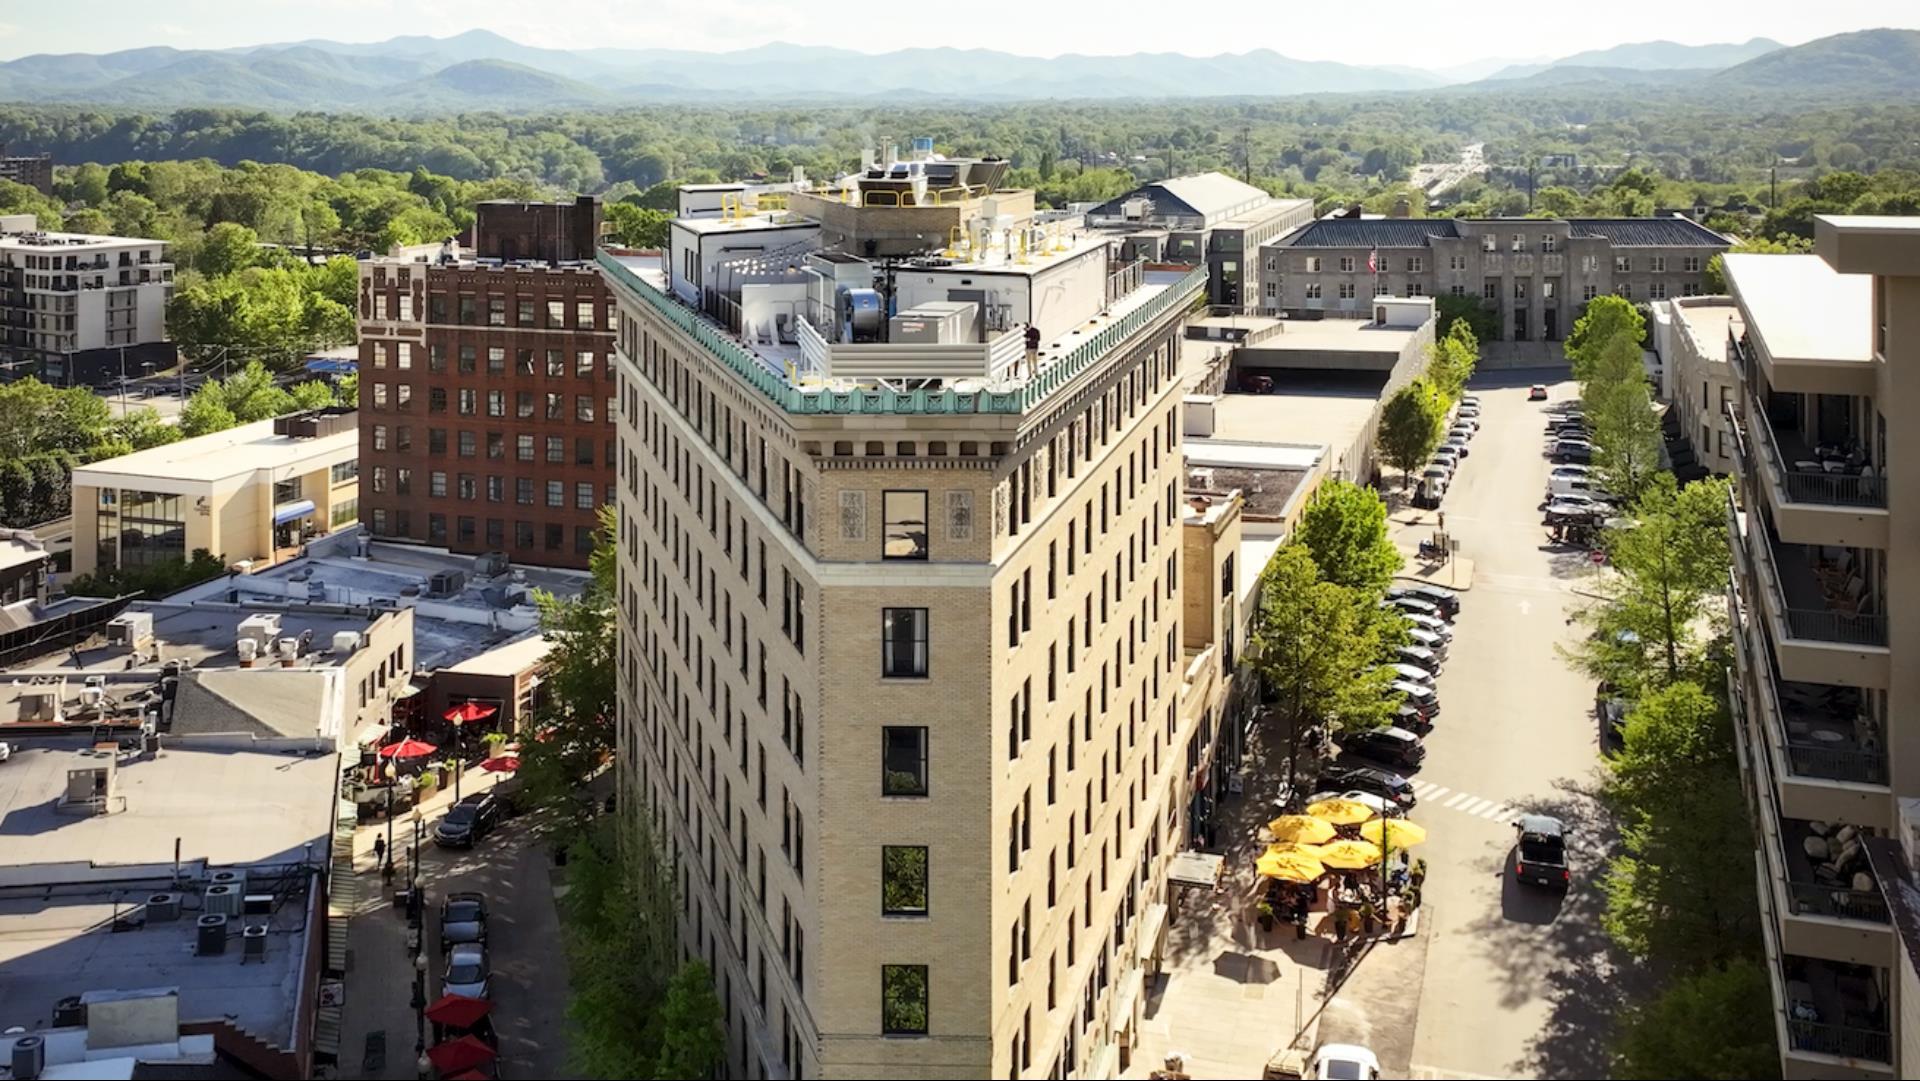 The Flat Iron Hotel in Asheville, NC